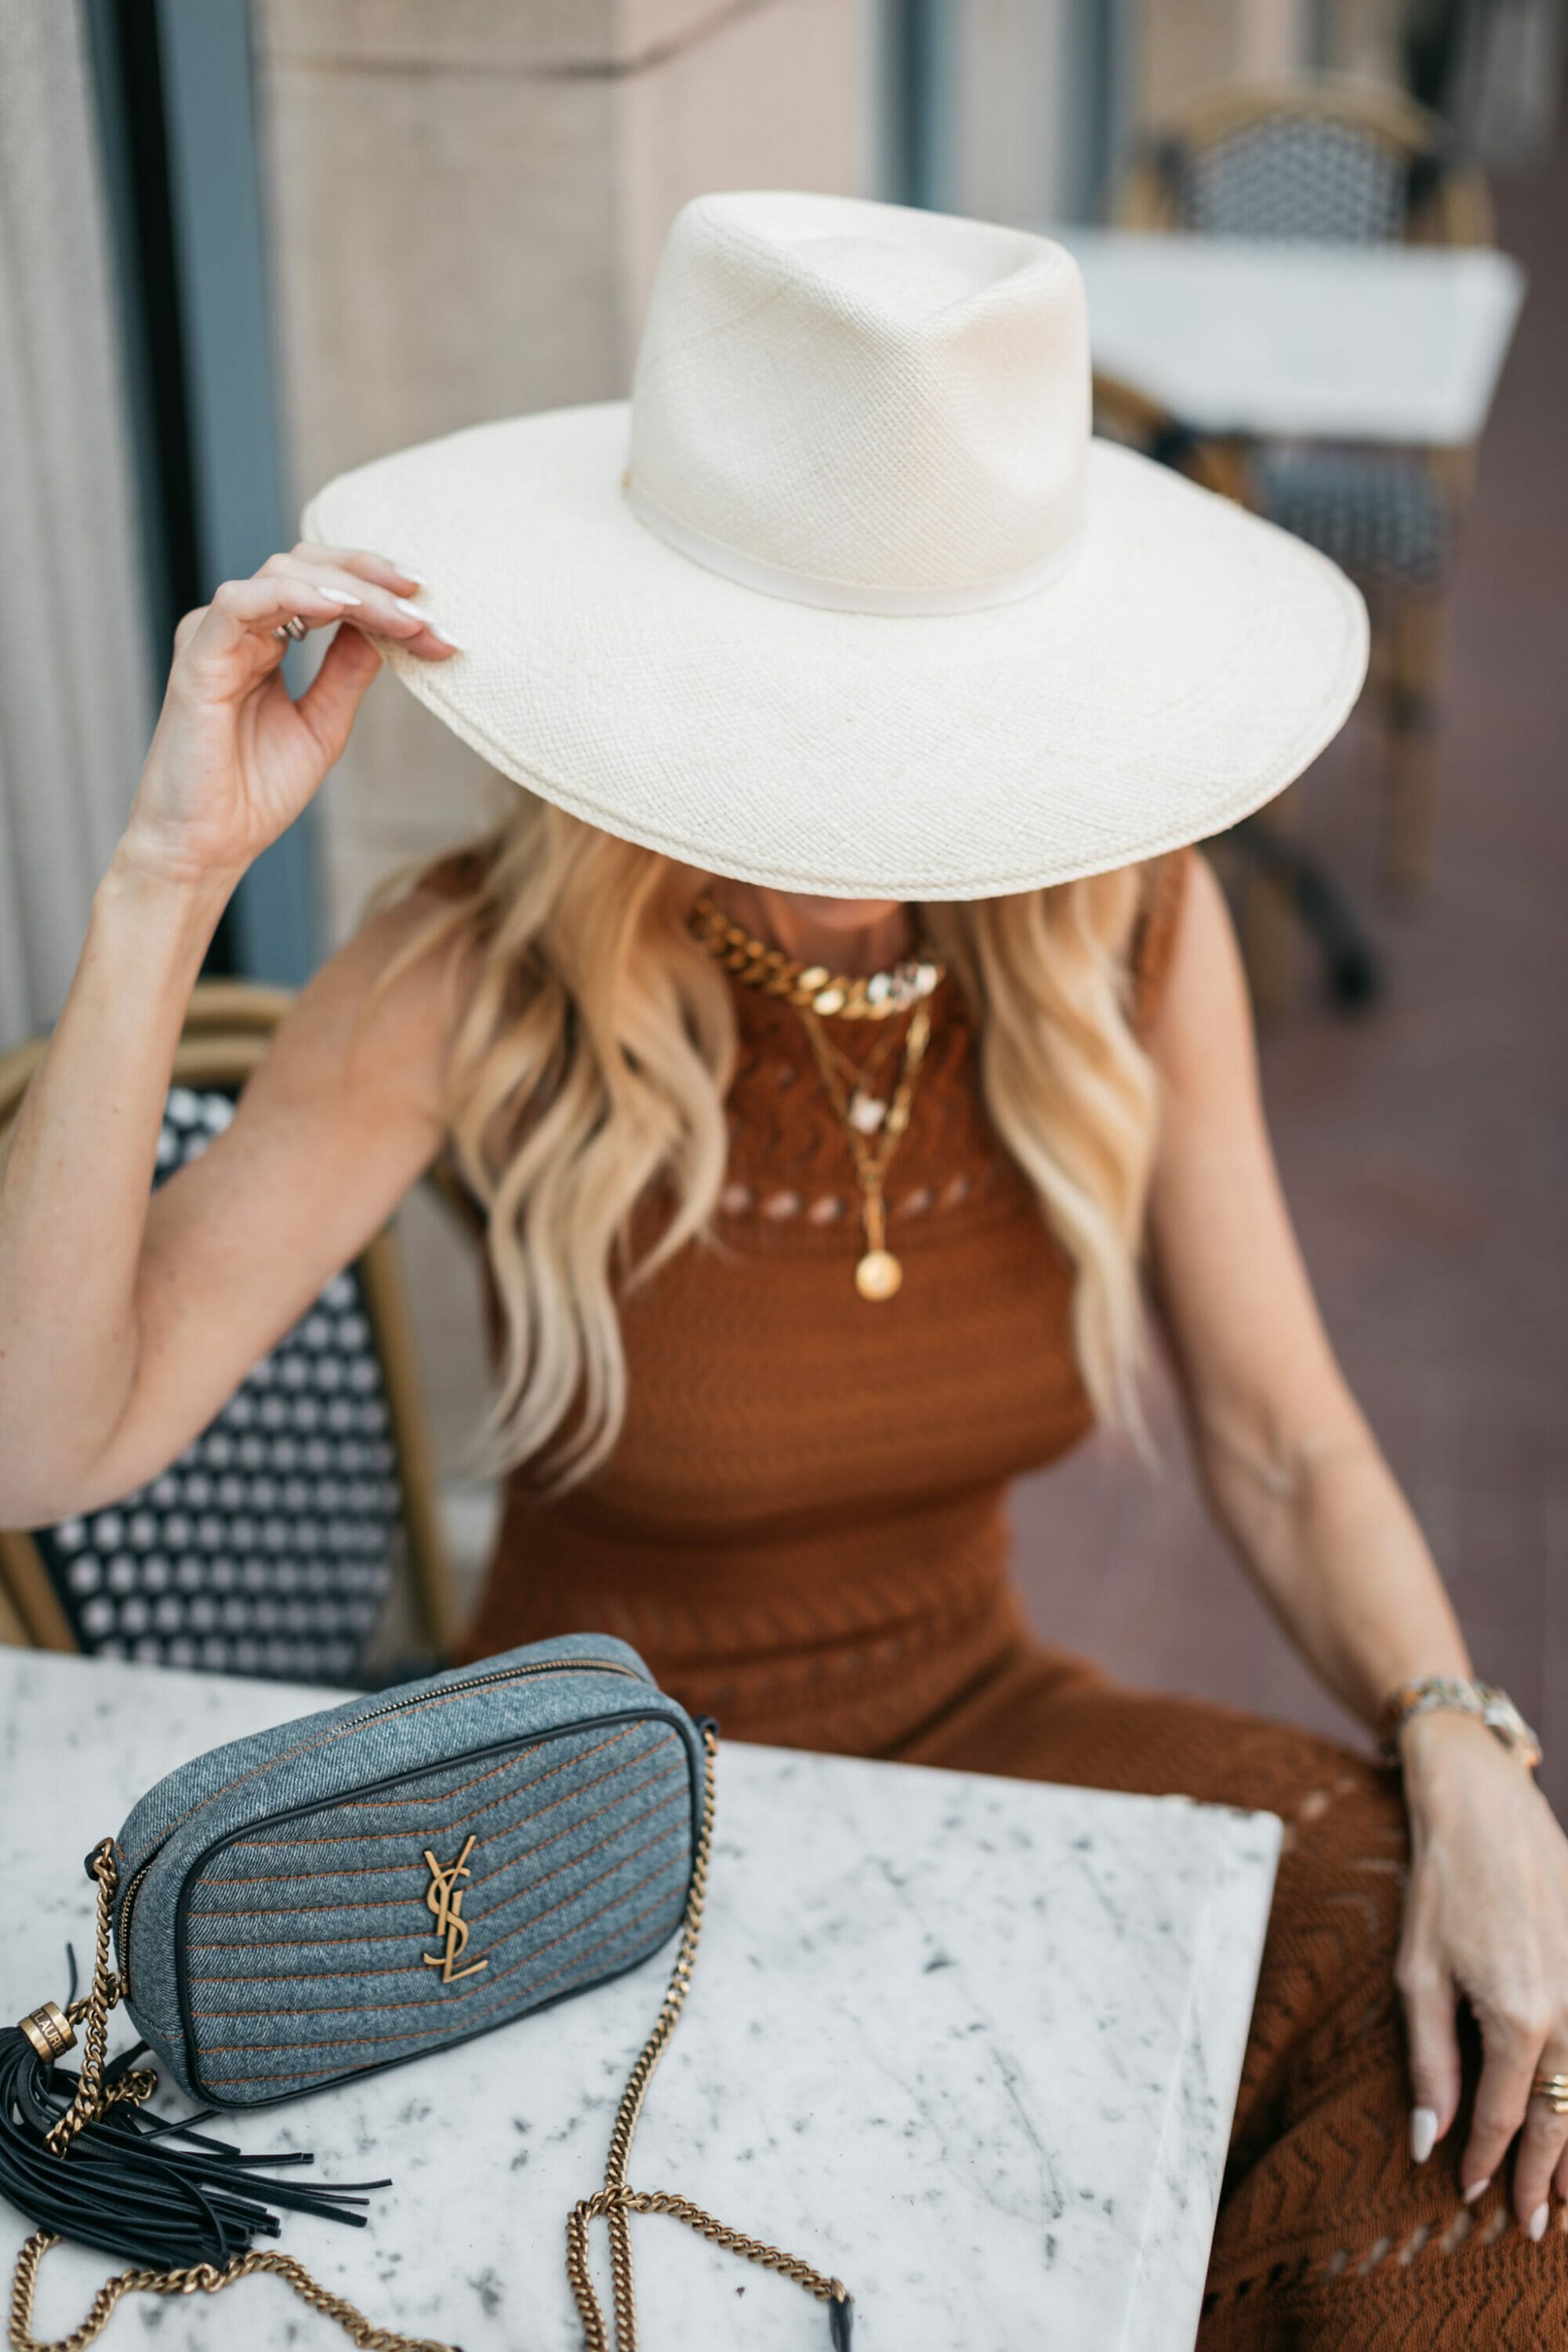 Over 40 fashion blogger wearing white sunhat with brown crochet dress and layered necklaces.